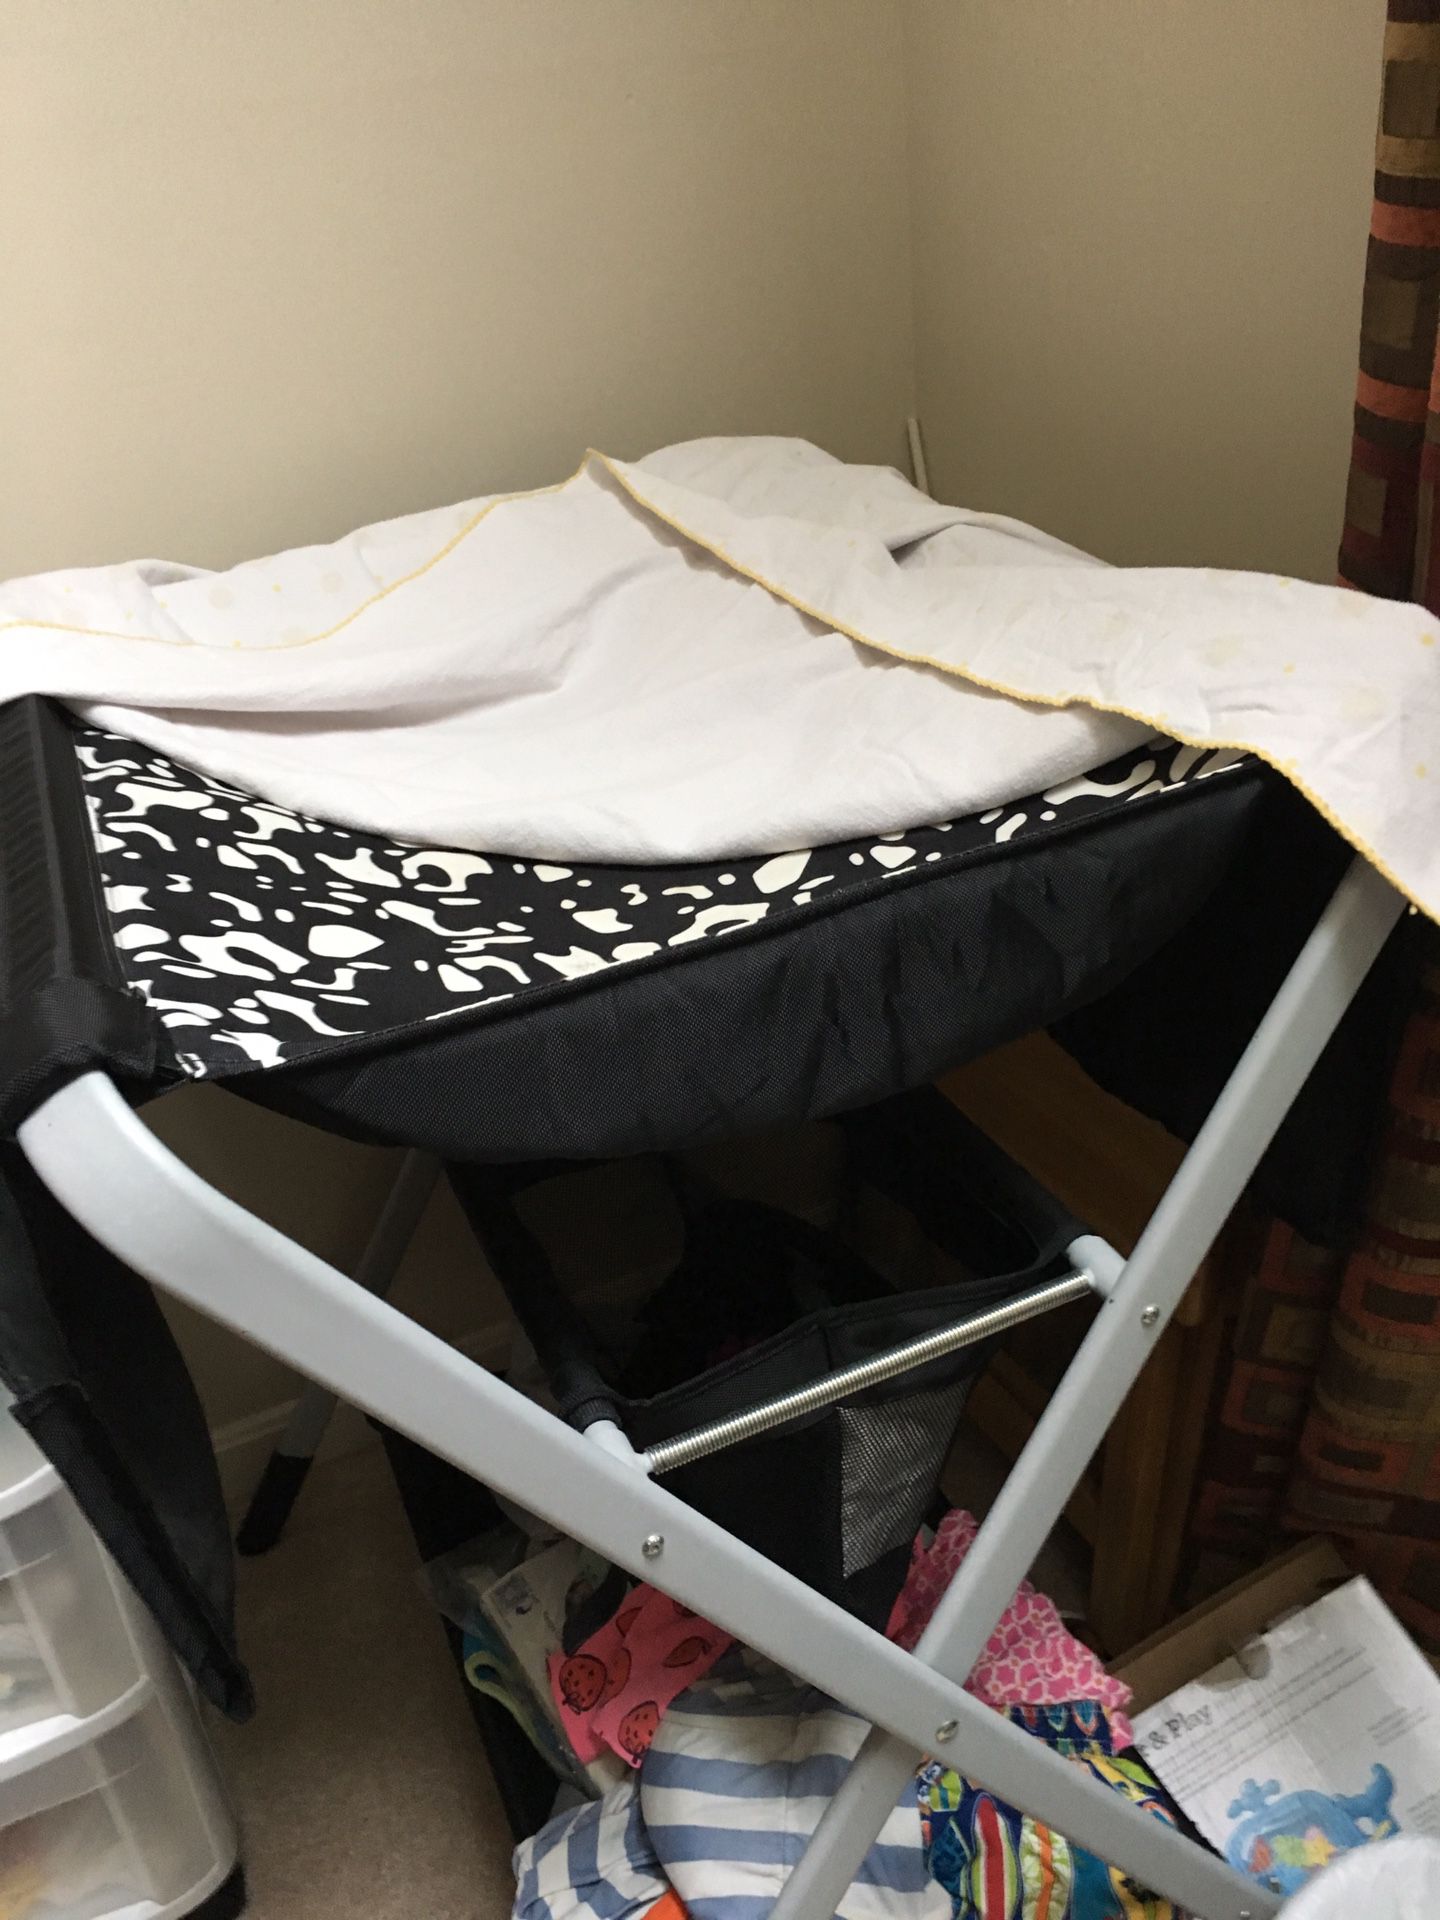 Collapsible Changing Table - in good condition!